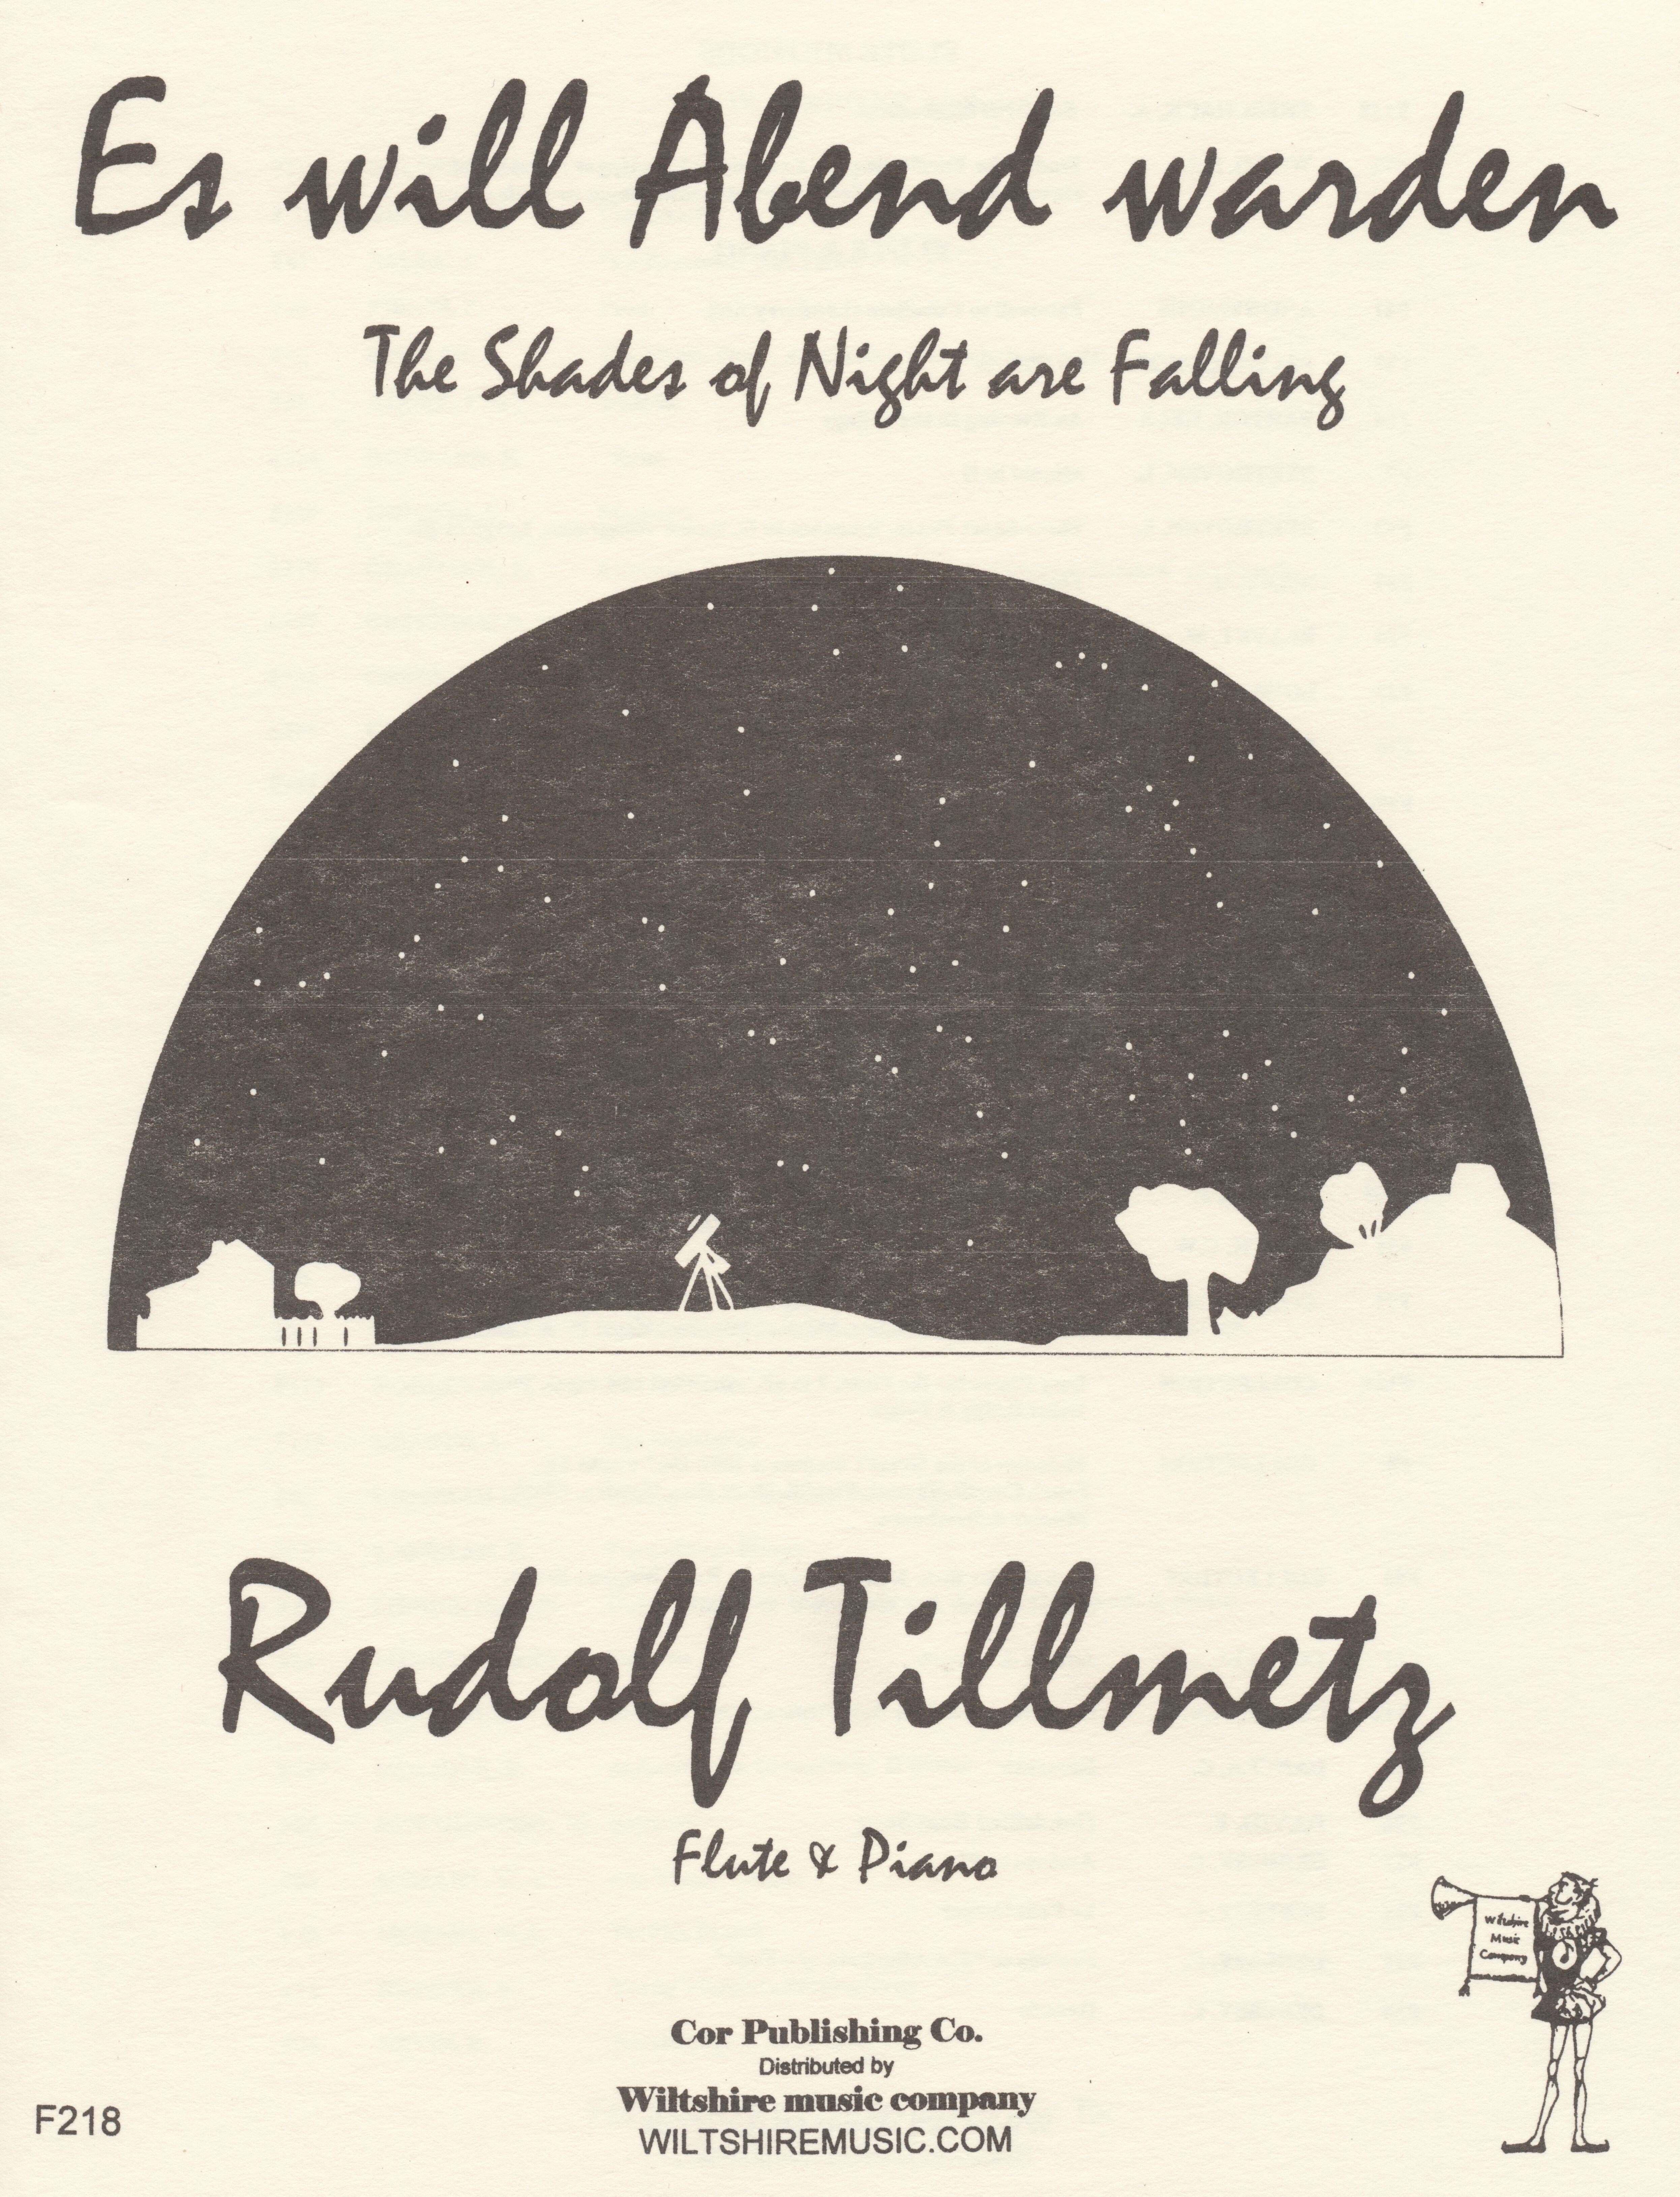 The Shades of Night are Falling, R. Tillmetz, flute & piano